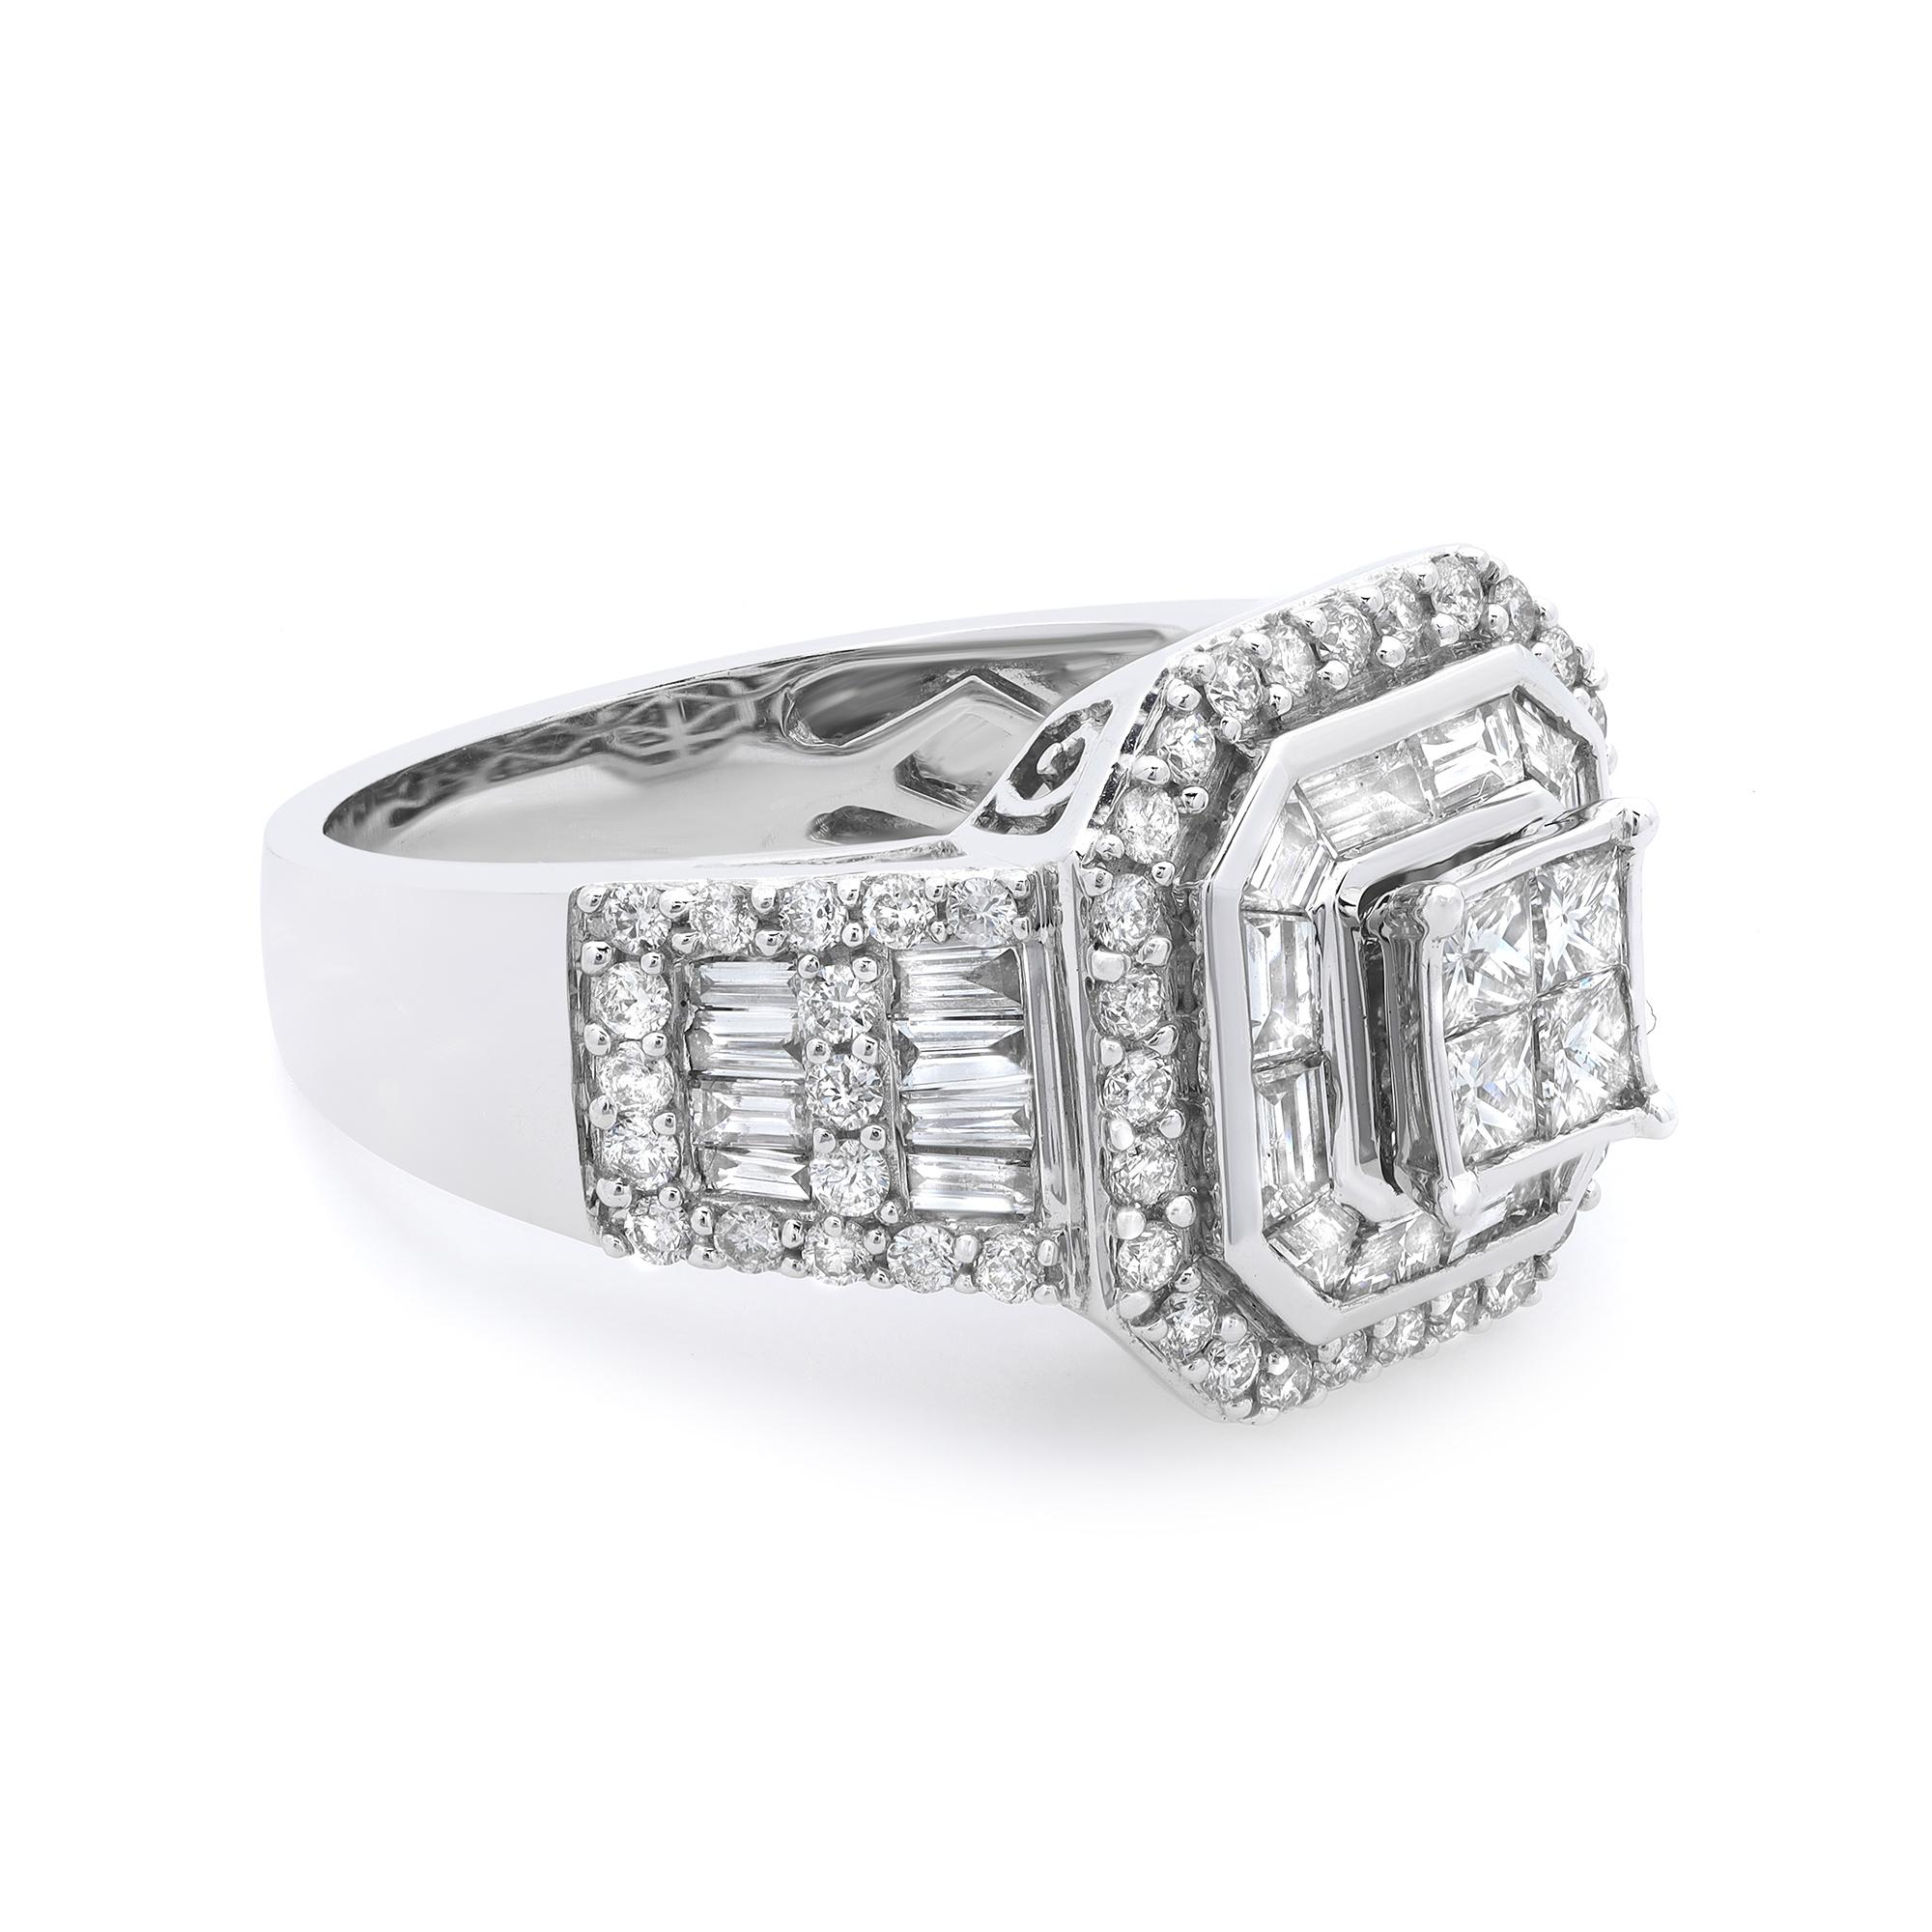 This beautiful diamond engagement ring exceptionally holds four princess cut center diamonds. Adding grace to the ring, the shank is encrusted with channel set baguette cut and pave set round brilliant cut diamonds in halo setting. The total diamond